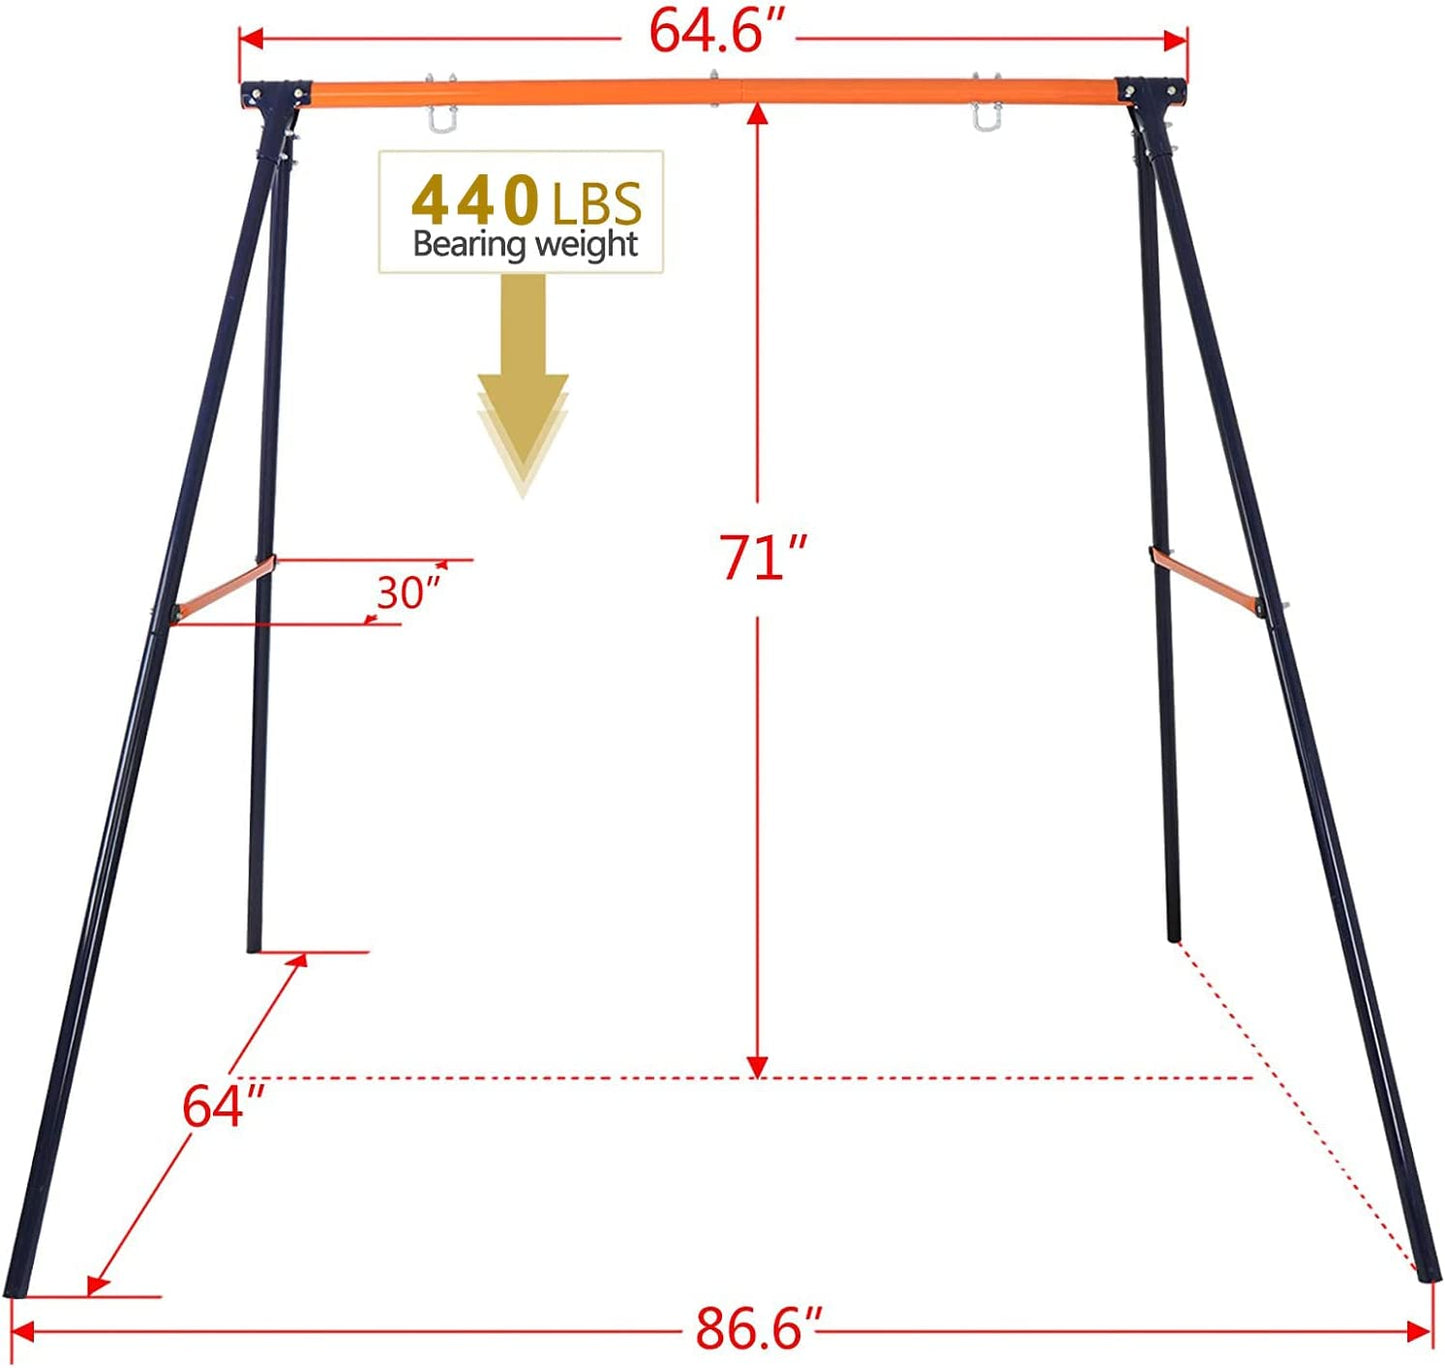 Swing Stand Frame Heavy Duty A-Frame Swing Set for Kids Adults Outdoor Backyard Play Fun Weight Capacity 440lbs